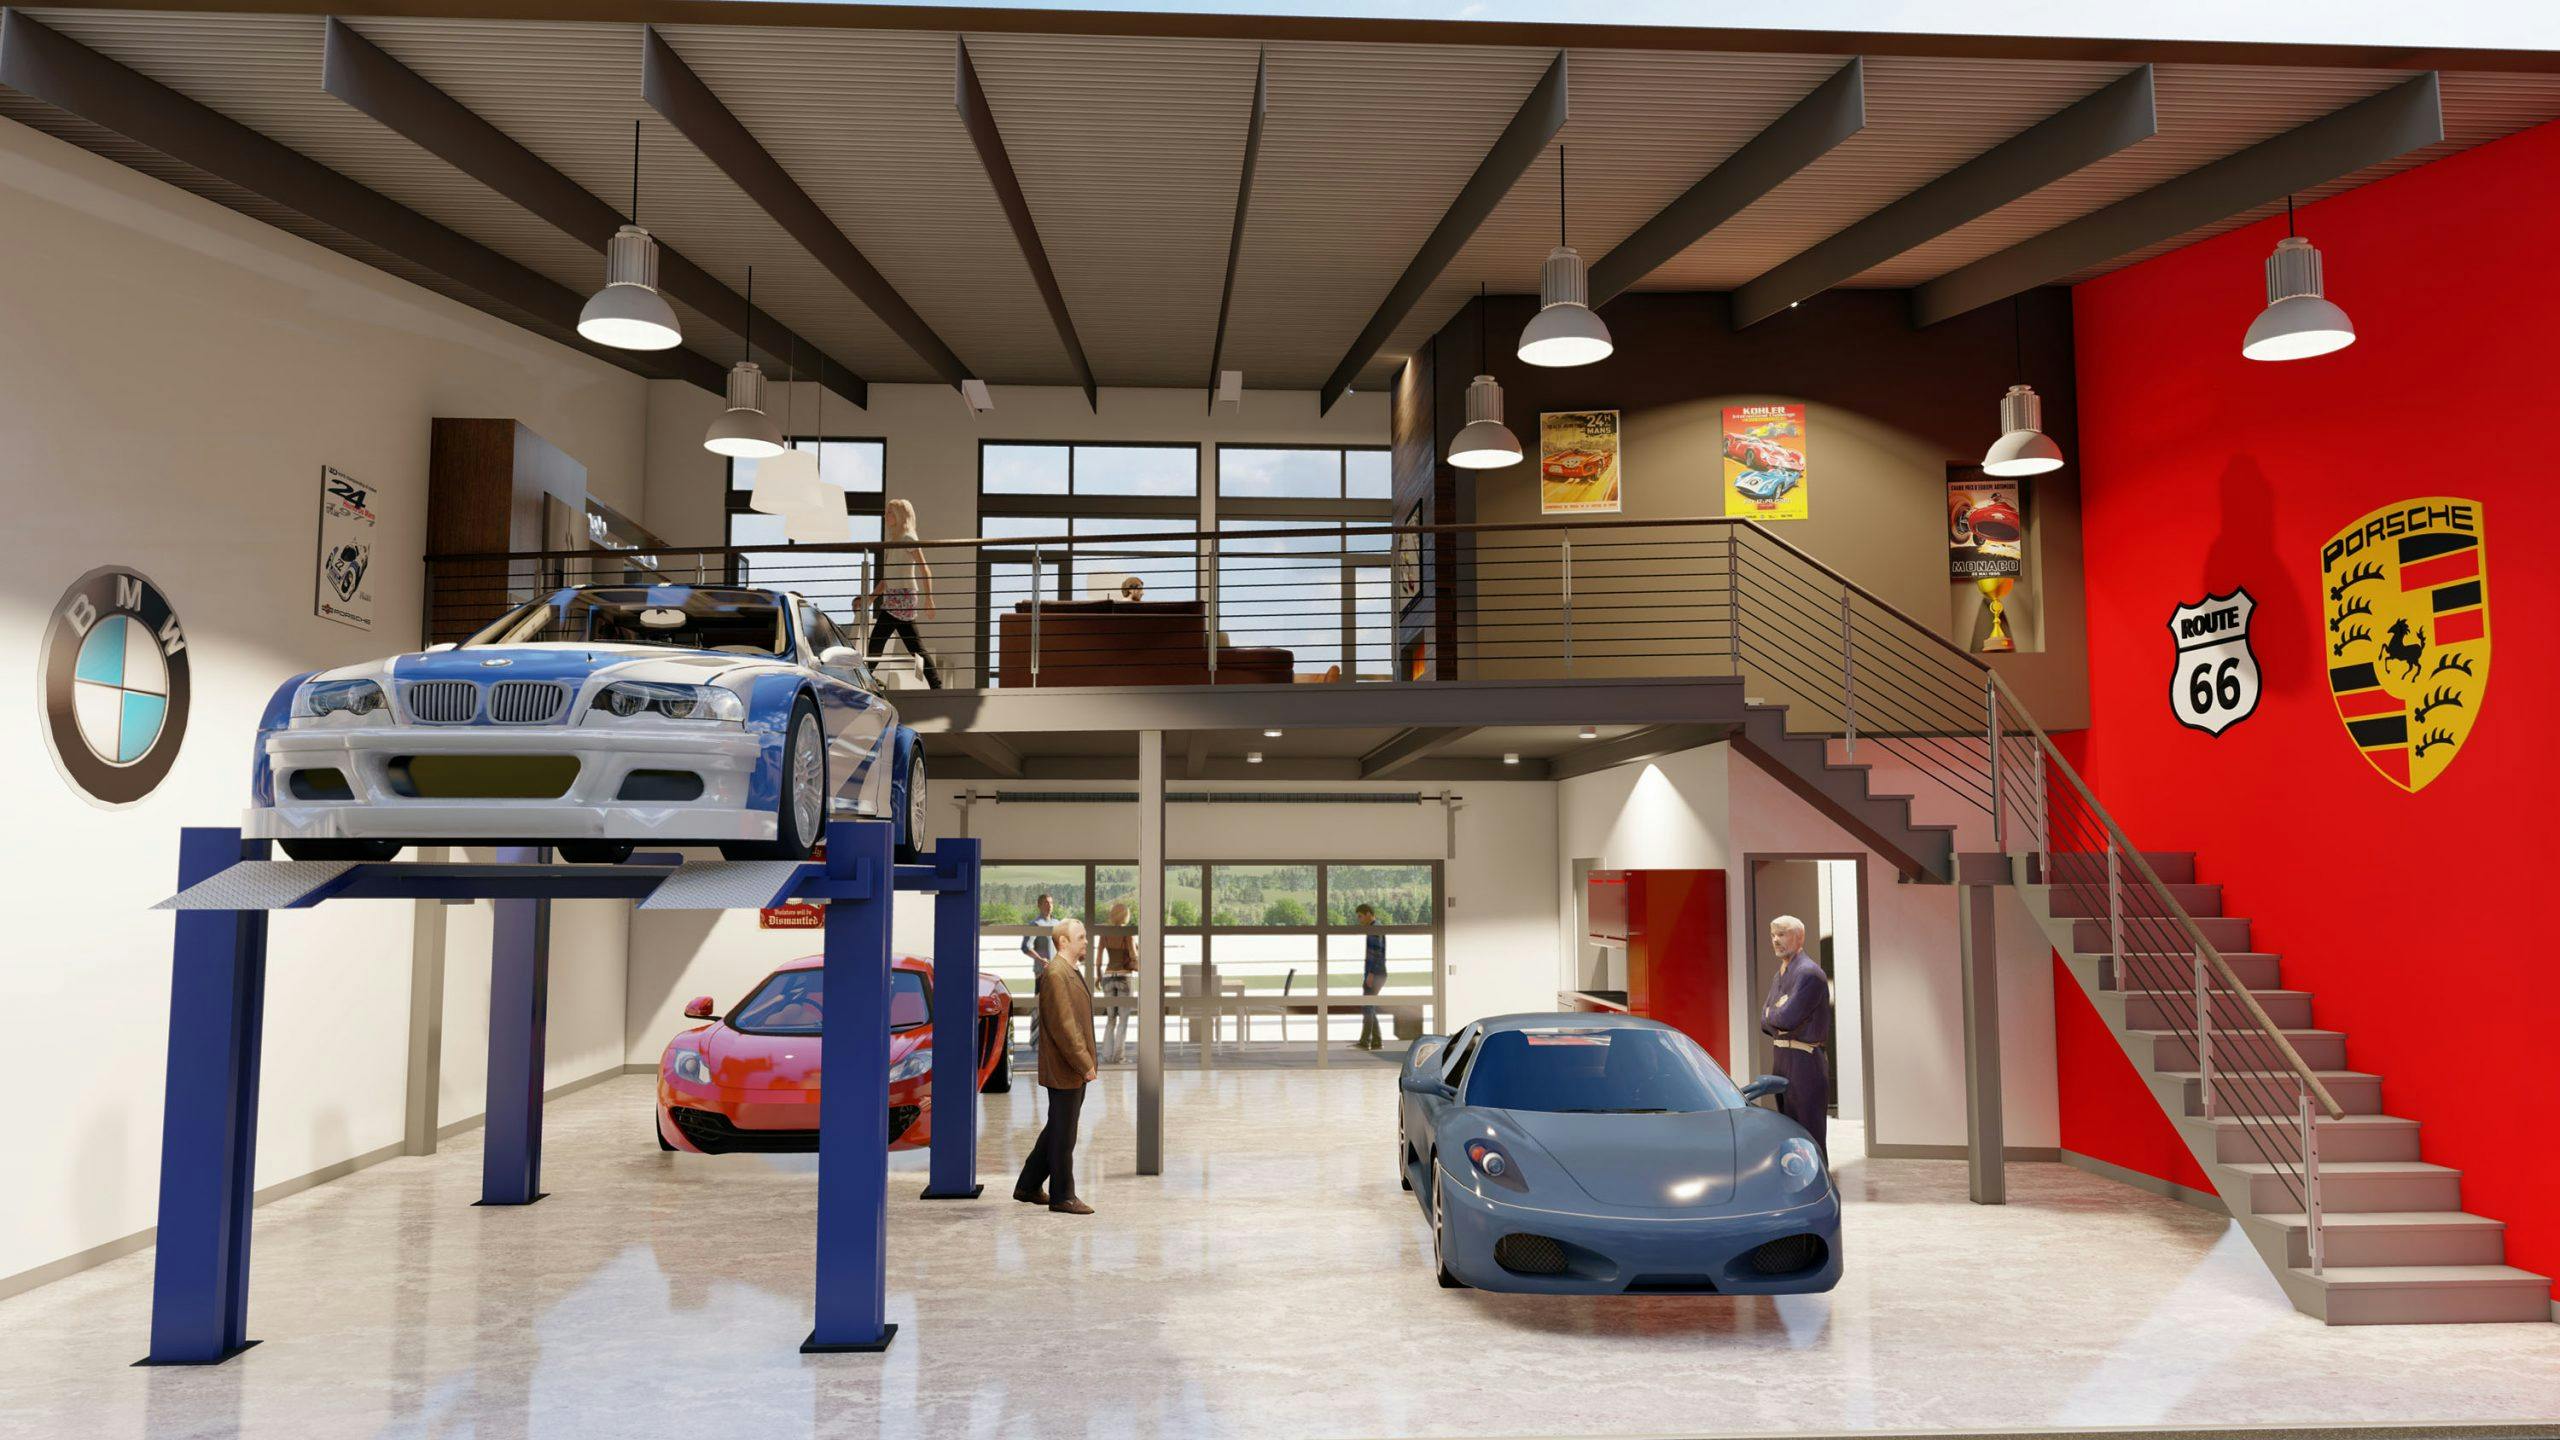 Autominiums condo rendering interior cars and people